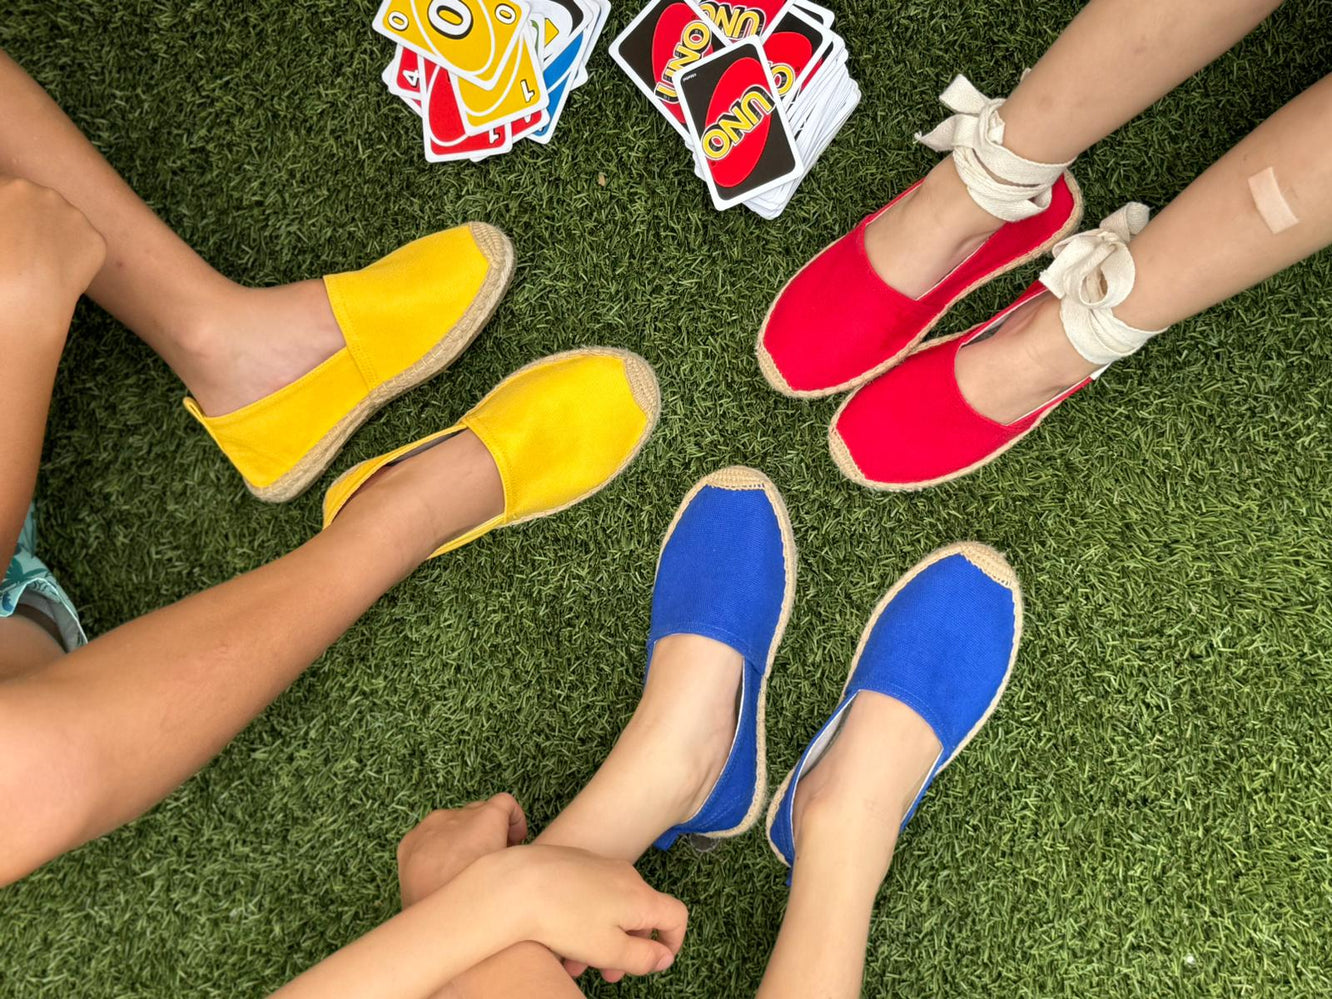 Three kids wearing espadrilles of different colors and playing Uno cards